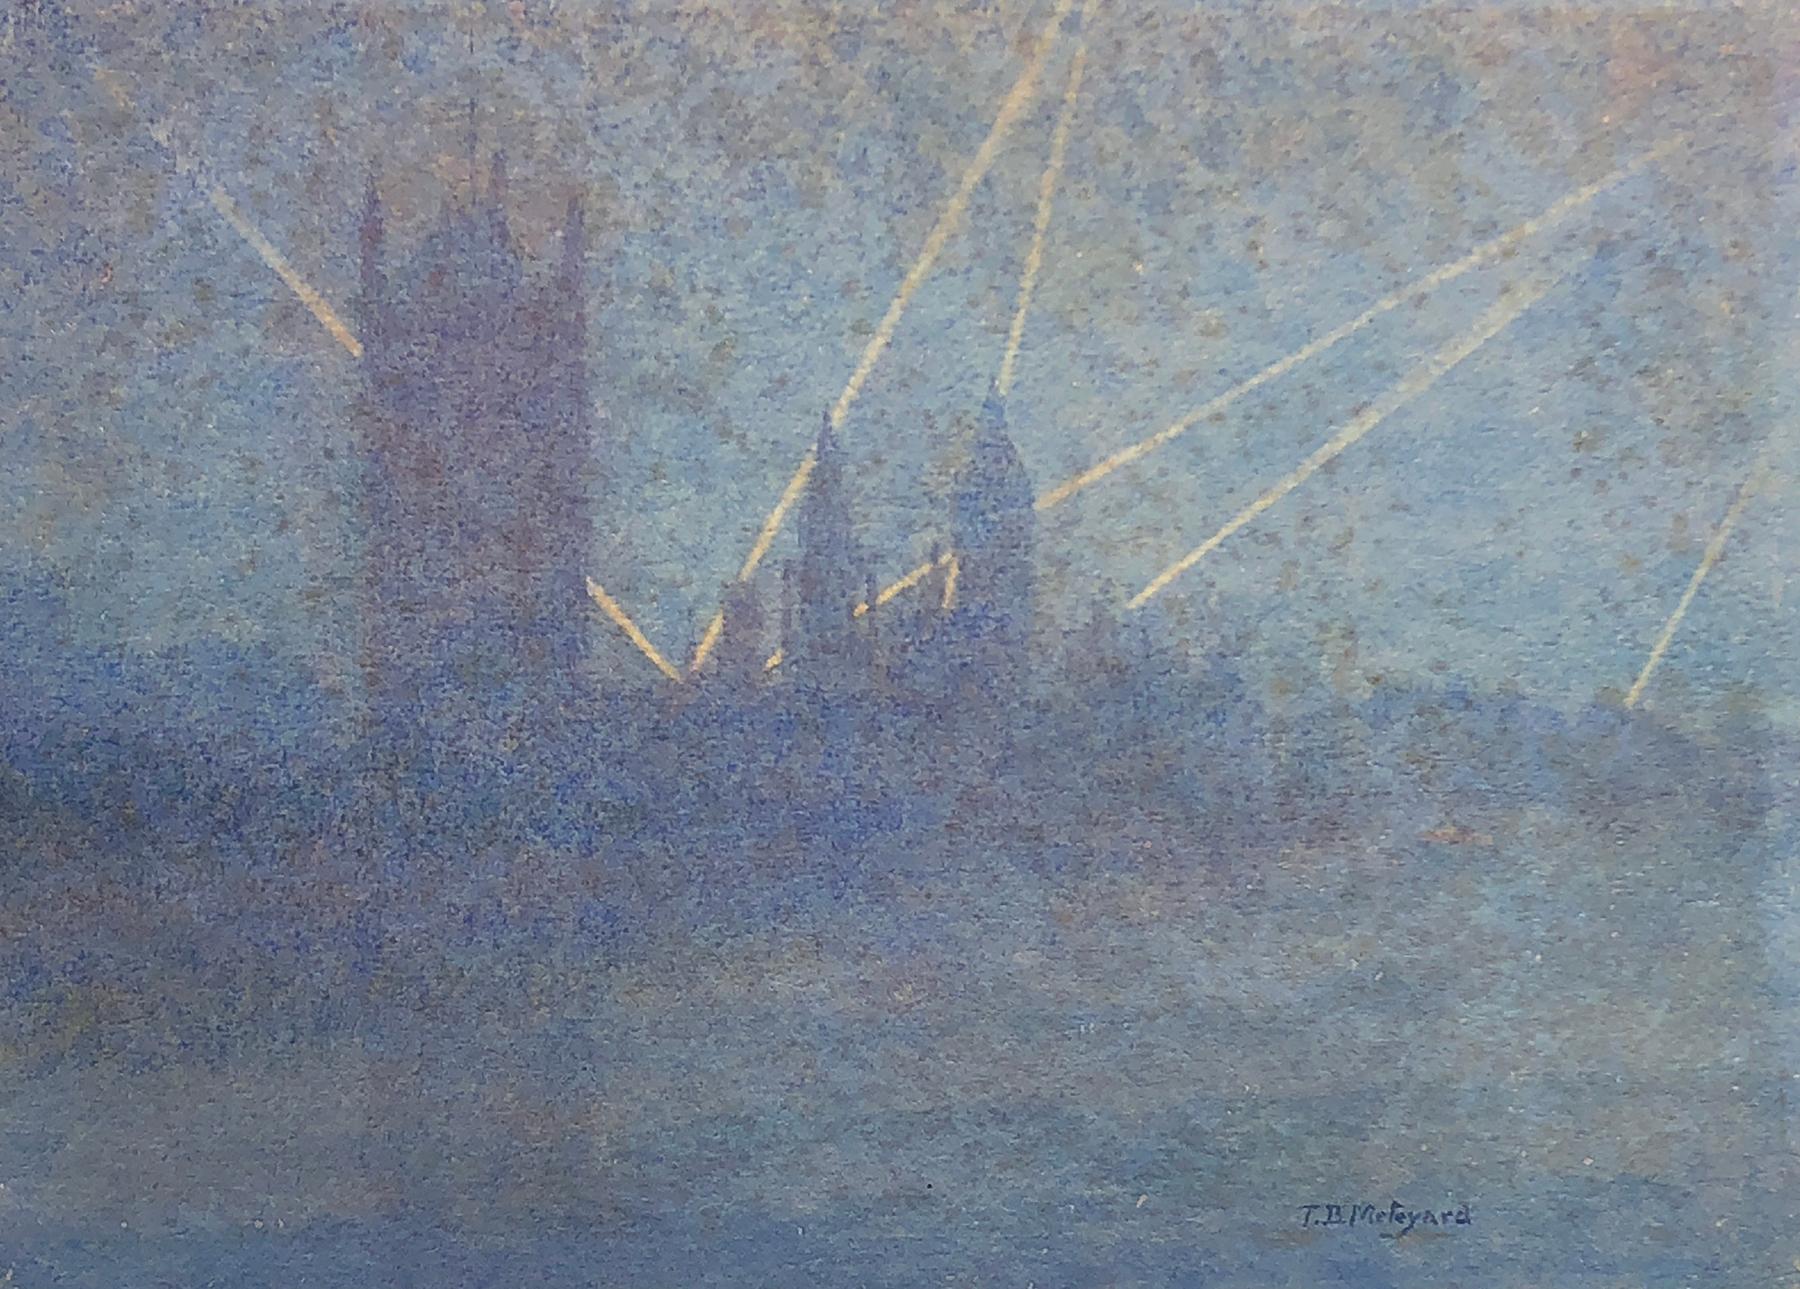 THOMAS BUFORD METEYARD
American, 1865–1928

Searchlights, Houses of Parliament, London (1915)

Signed T.B. Meteyard
Watercolor on paper
7½ x10 inches (19 x 25.4 cm)
Framed: 15½ x 19 inches (39.4 x 48.3 cm)

Executed in 1915.

Provenance
Estate of